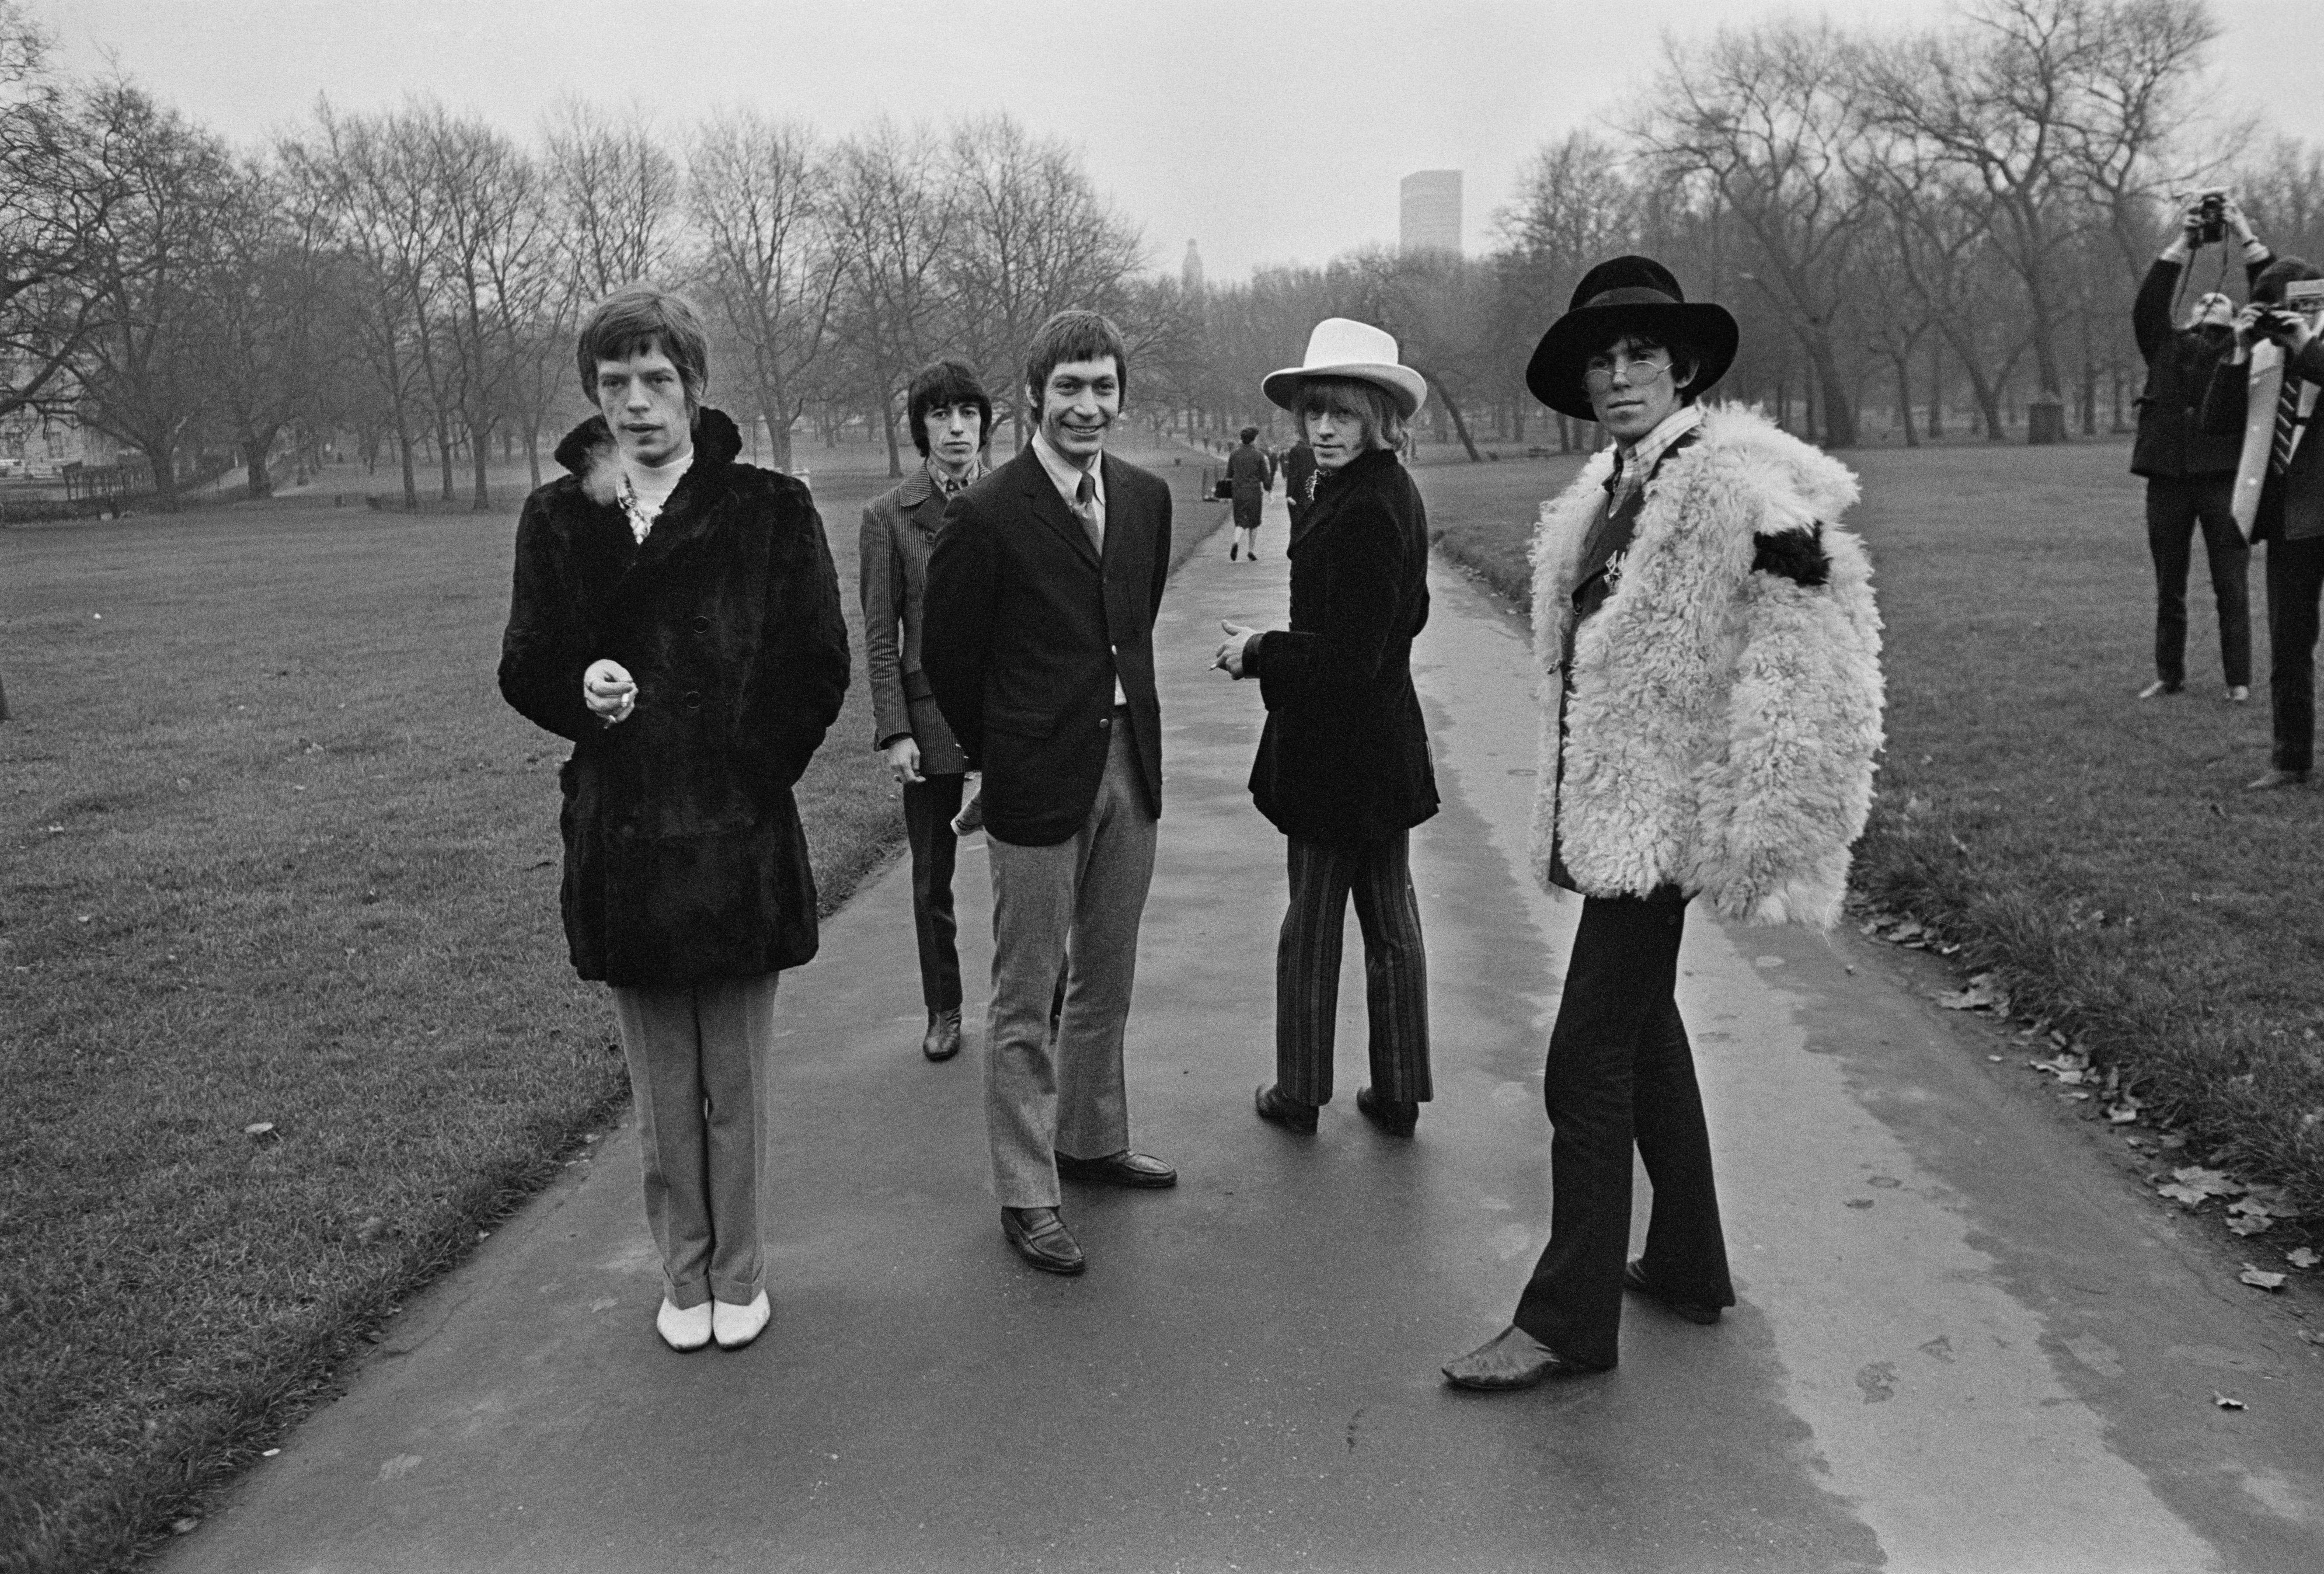  Roger Jackson/Central Press/Getty Images Figurative Photograph - Roger Jackson 'Park Stones' Rolling Stones Limited Edition Photograph 20x24